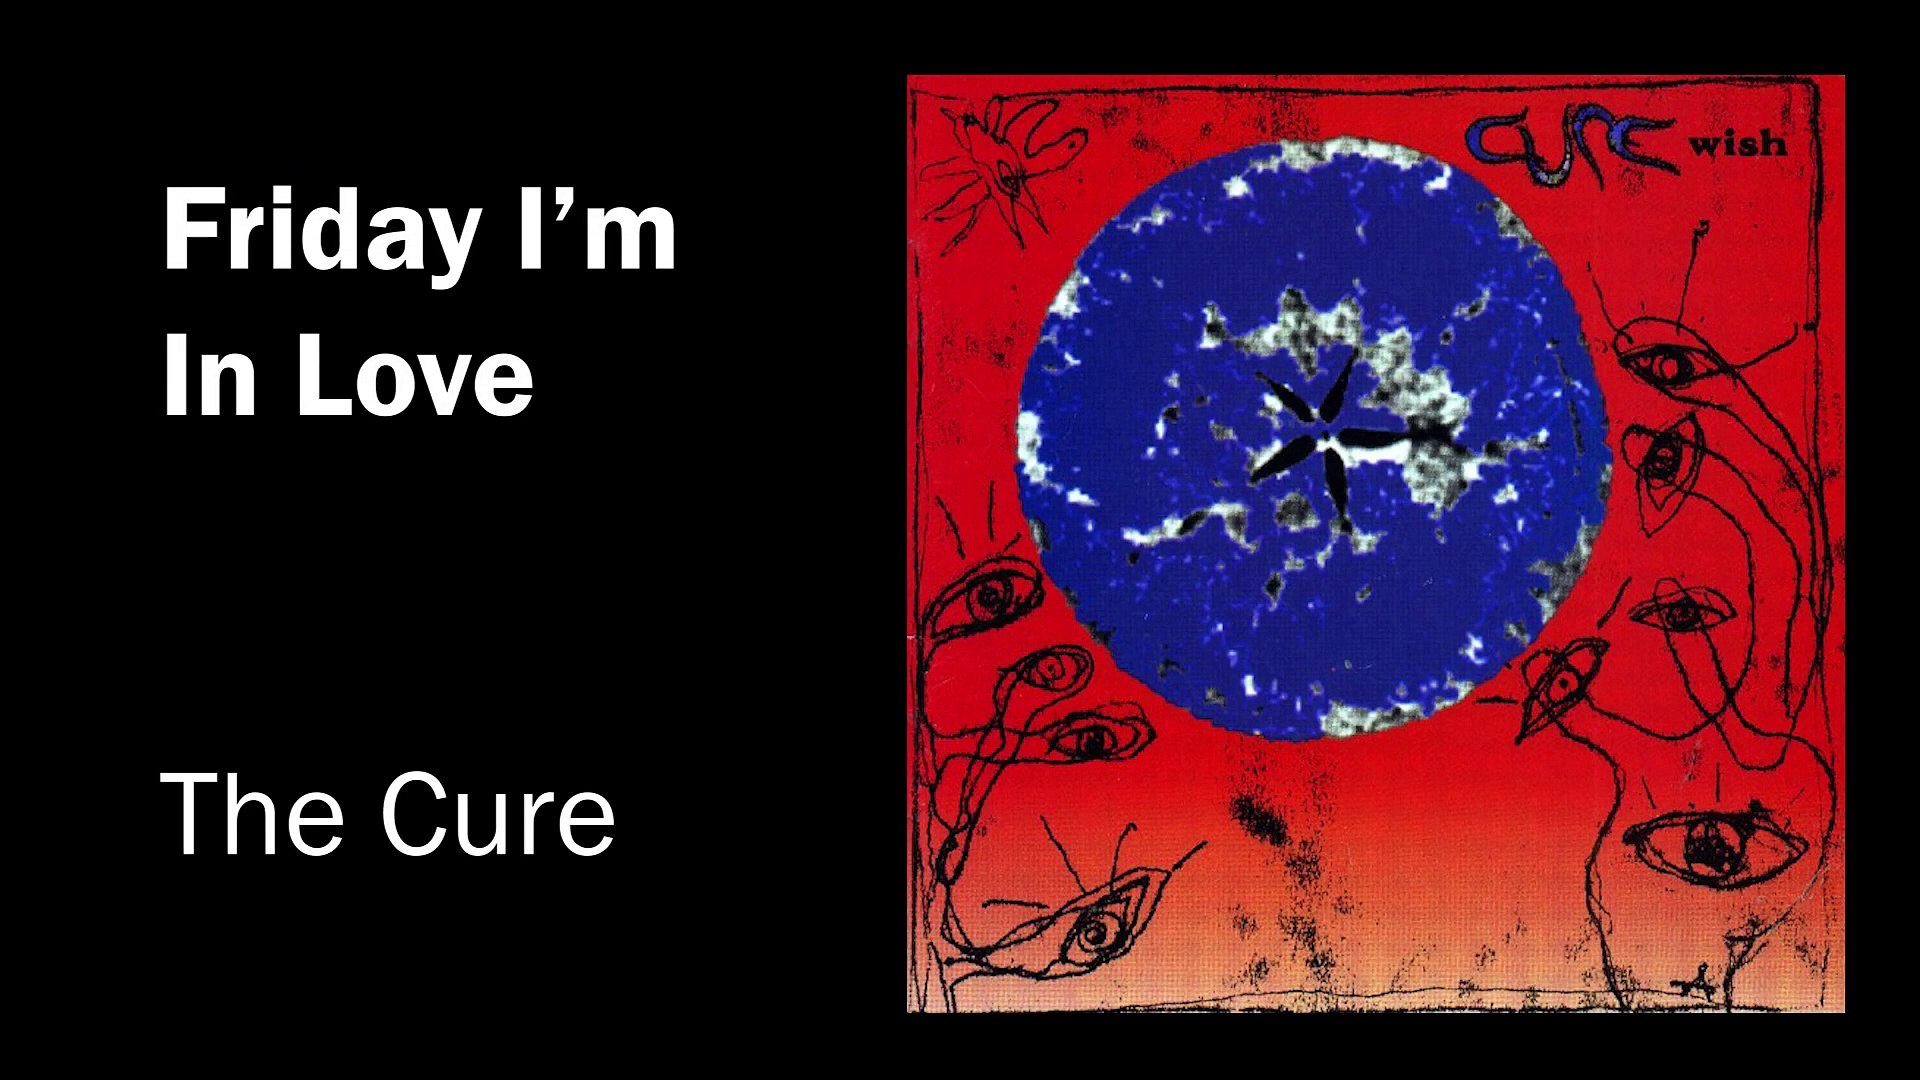 Friday i m in love the cure. Cure Friday. The Cure Friday i'm in Love.